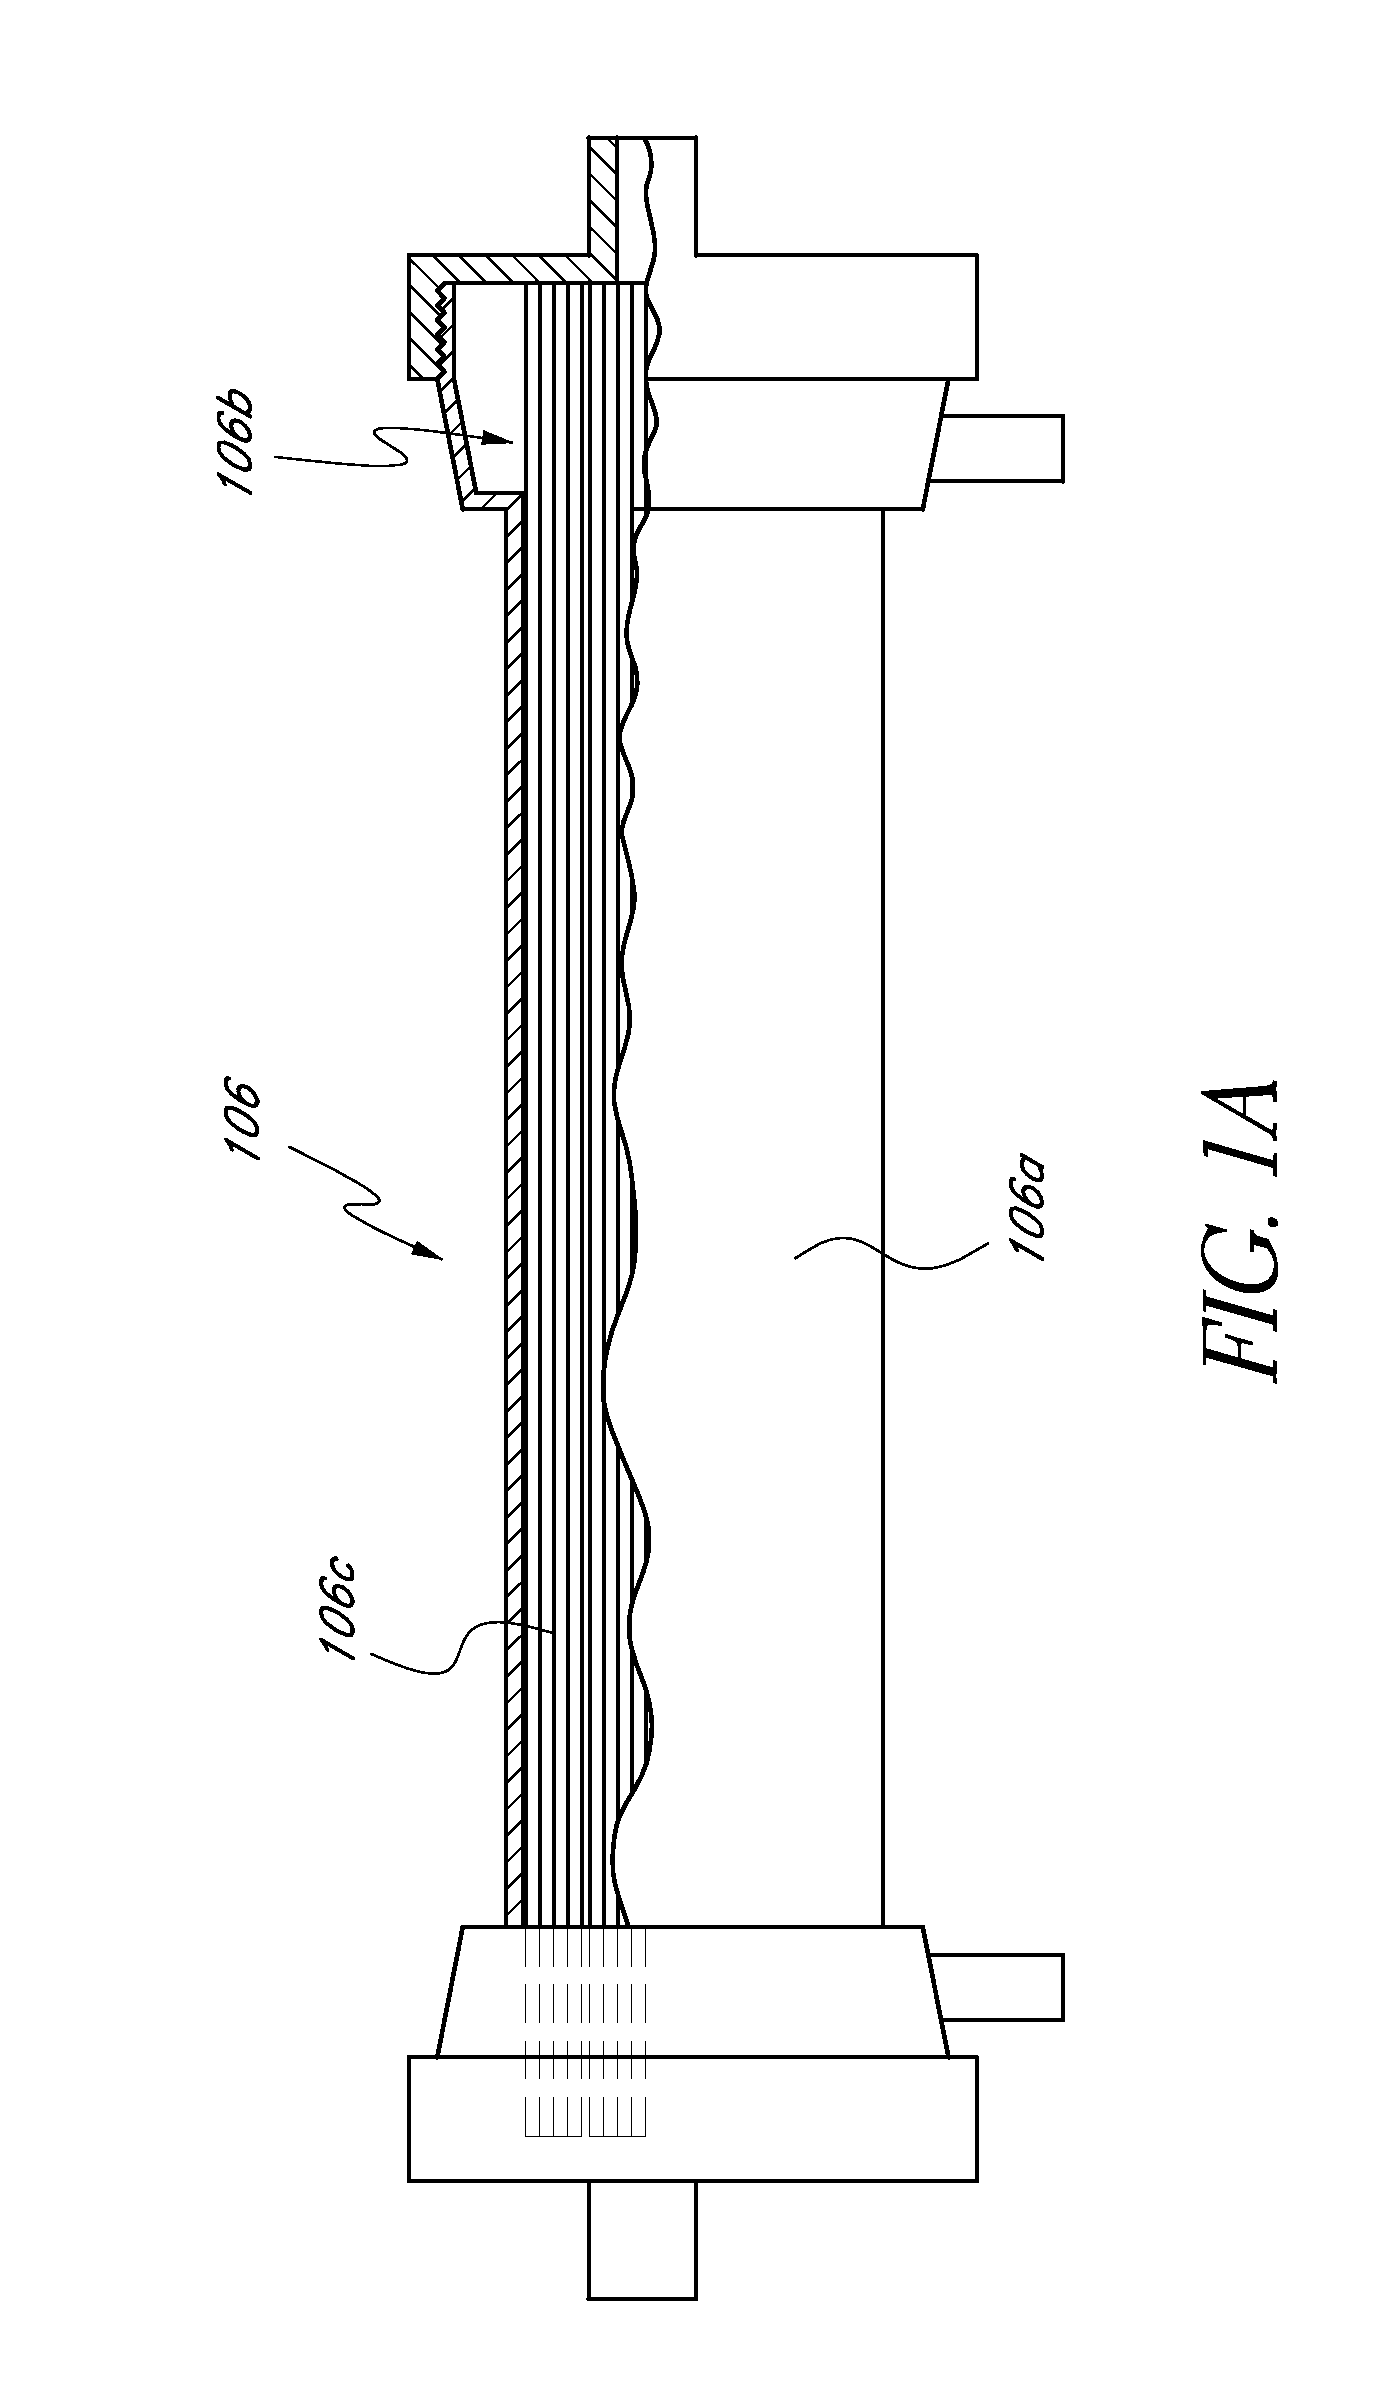 Apparatus and method for down-regulating immune system mediators in blood